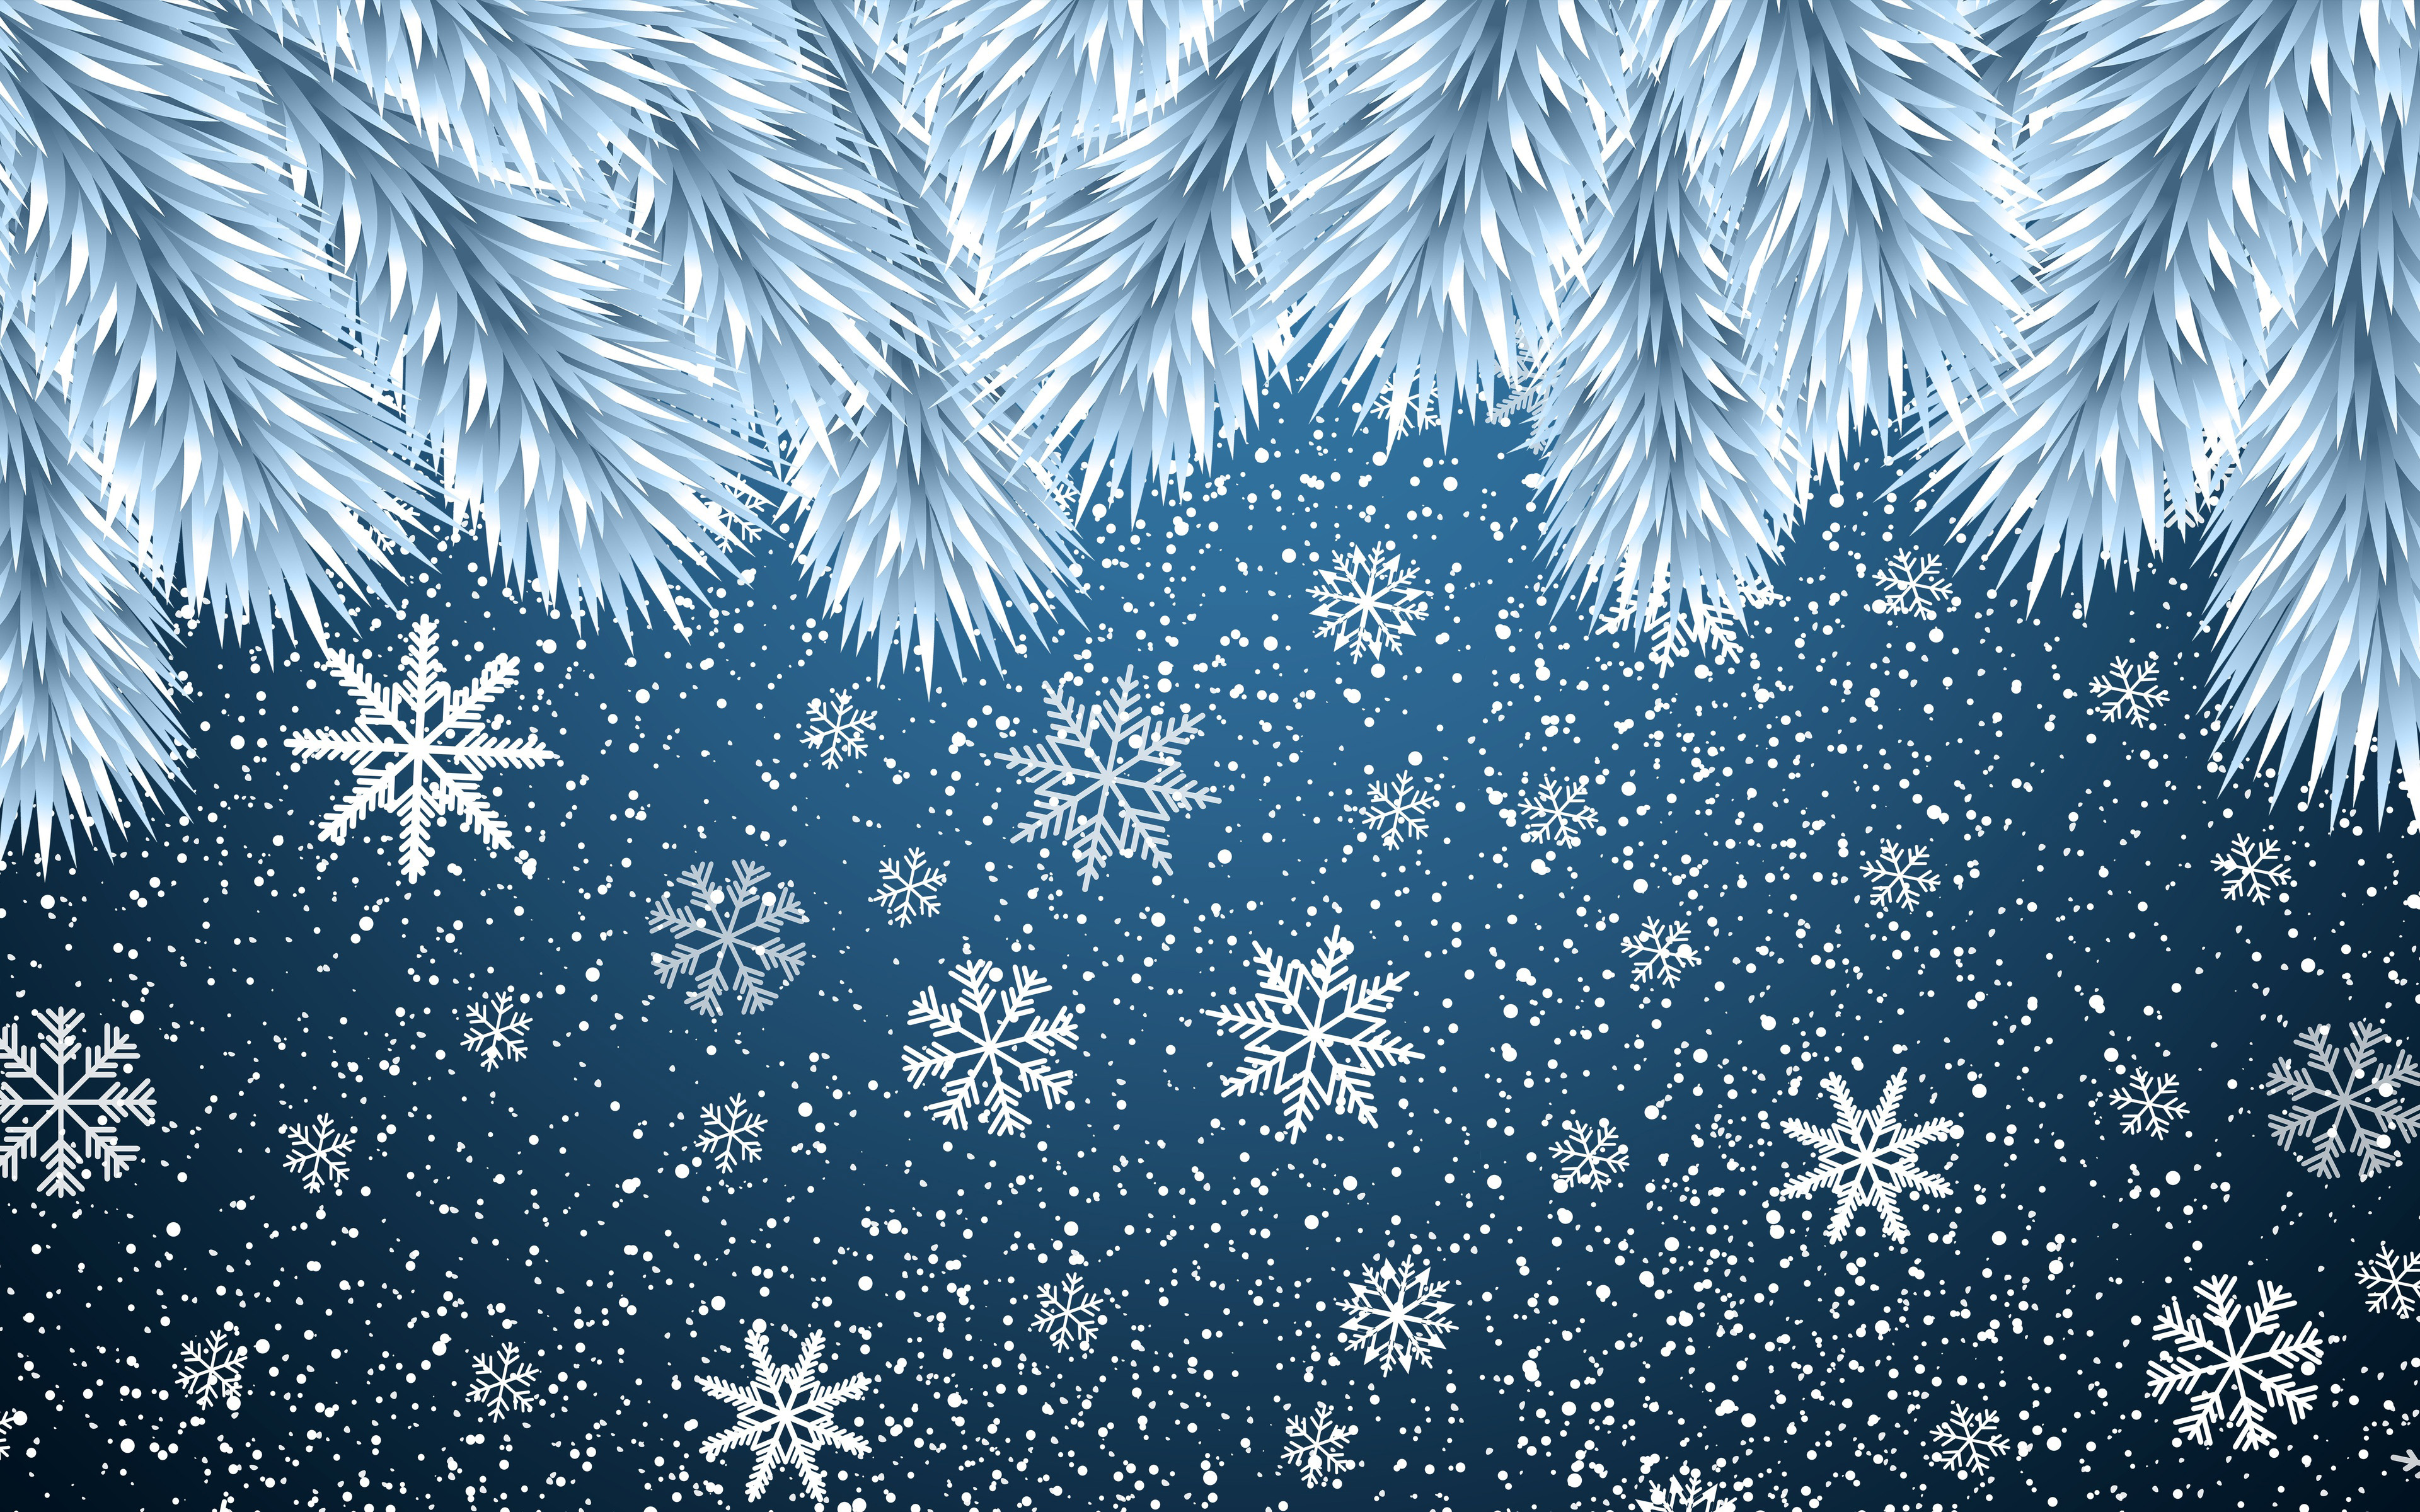 Download wallpaper 4k, blue snowflakes background, snowfall, snowflakes patterns, winter background, Christmas concepts, snowflakes, white snowflakes, Merry Christmas for desktop with resolution 3840x2400. High Quality HD picture wallpaper